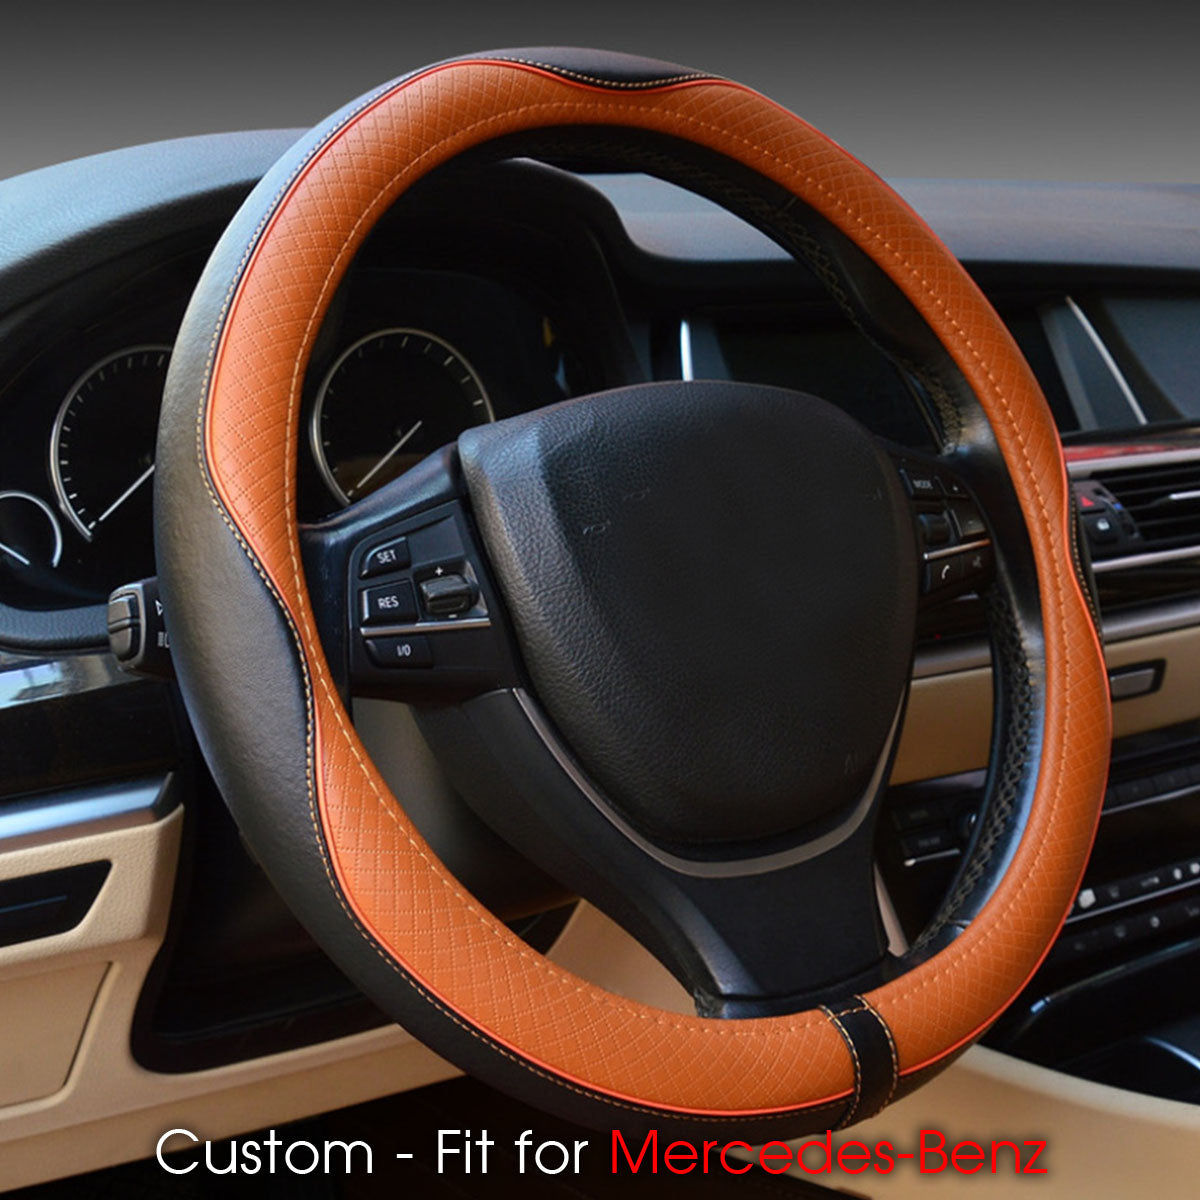 Car Steering Wheel Cover, Custom For Your Cars, Anti-Slip, Safety, Soft, Breathable, Heavy Duty, Thick, Full Surround, Sports Style, Car Accessories MB18990